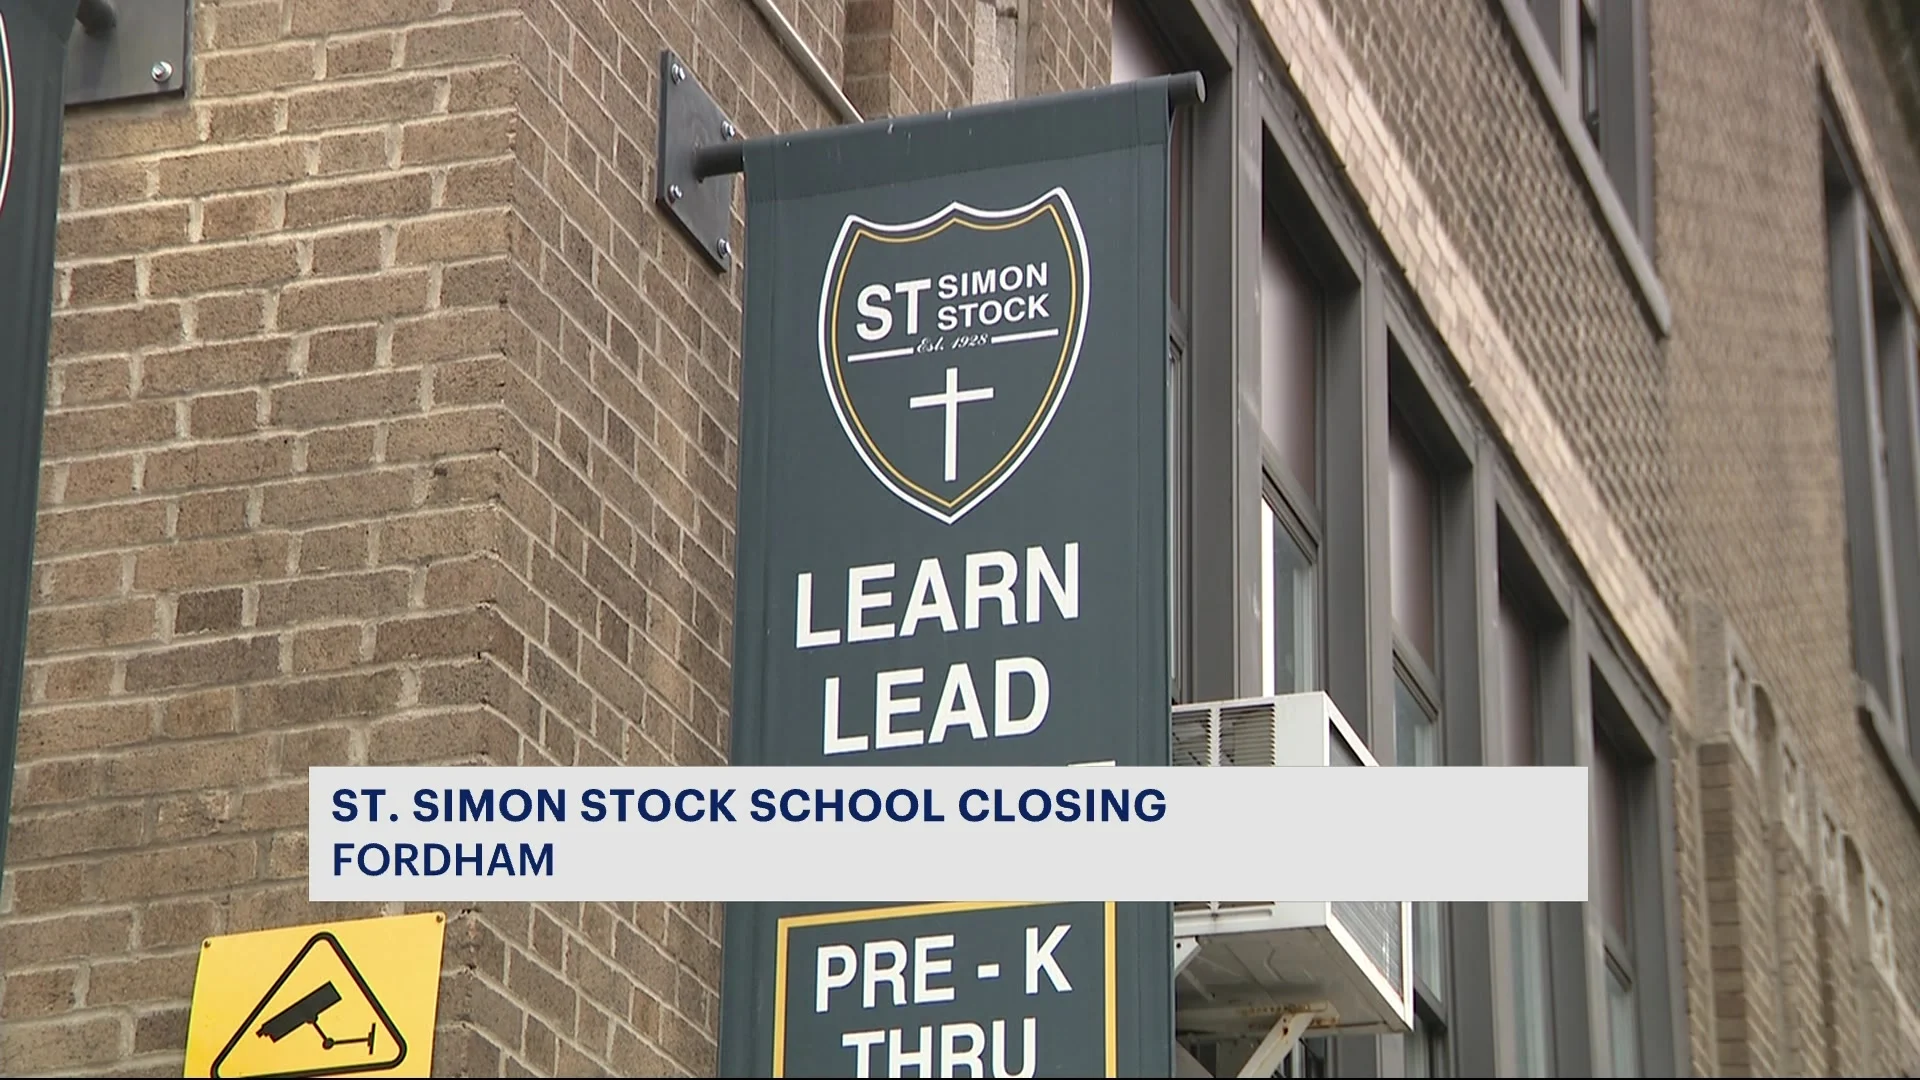 St. Simon Stock School in Fordham won't reopen this fall due to low enrollment